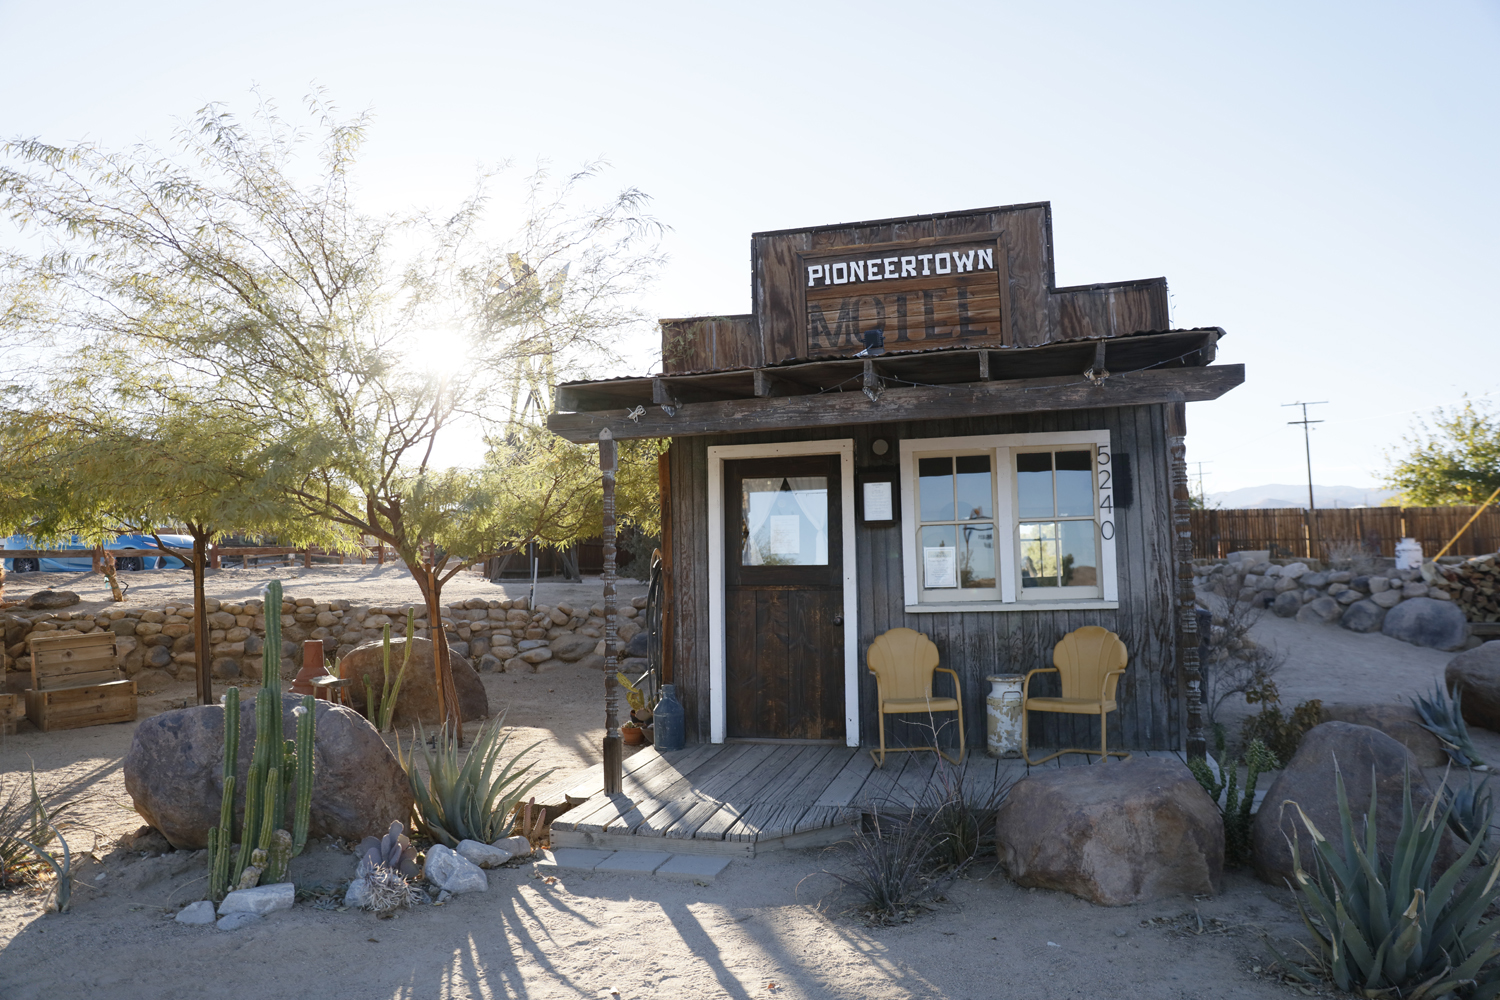 View of the small Western style building where guests check in to the Pioneertown Motel in Pioneertown, California.